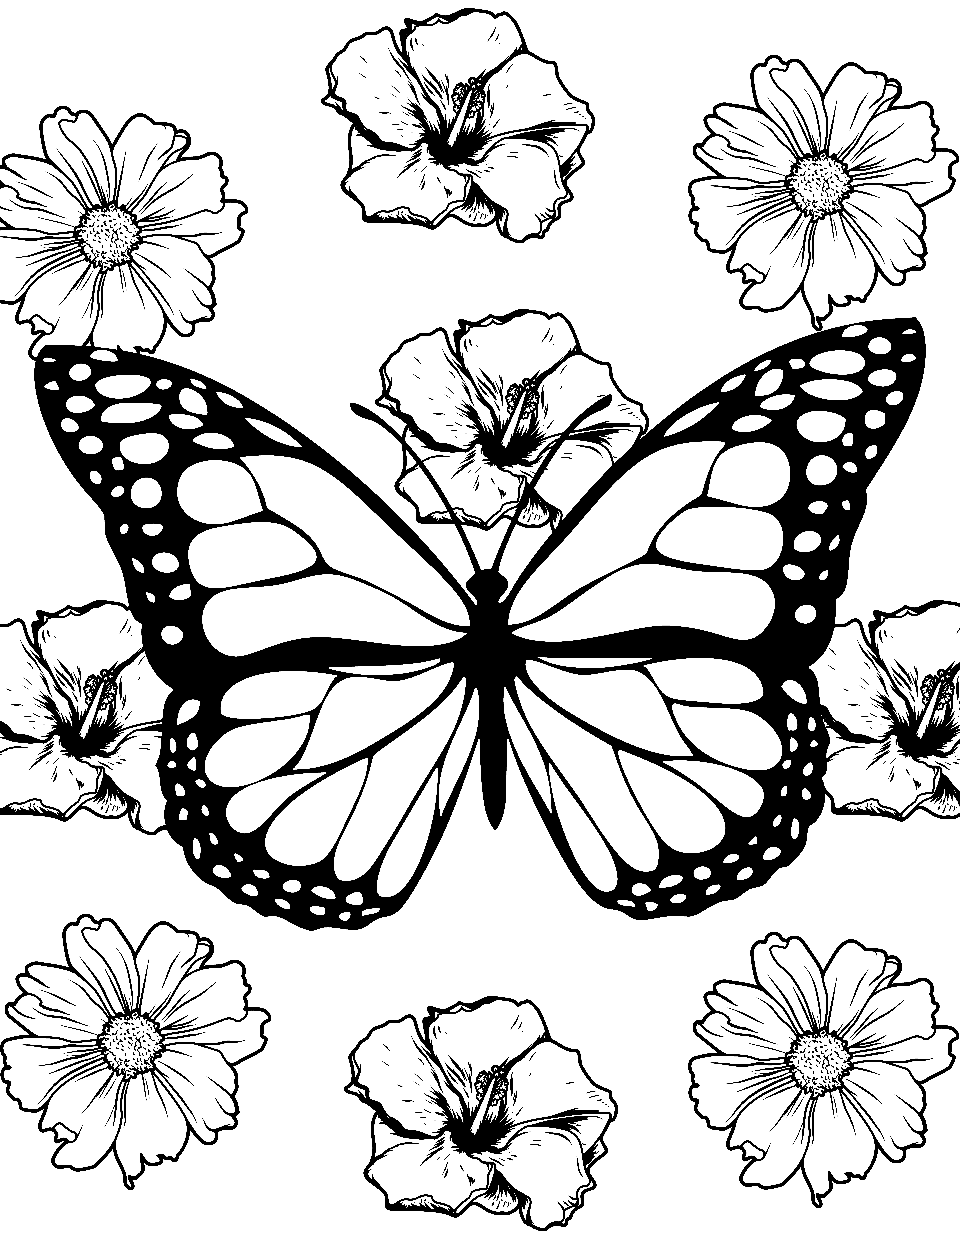 Butterfly Bliss Coloring Page - A single butterfly flying over flowers.